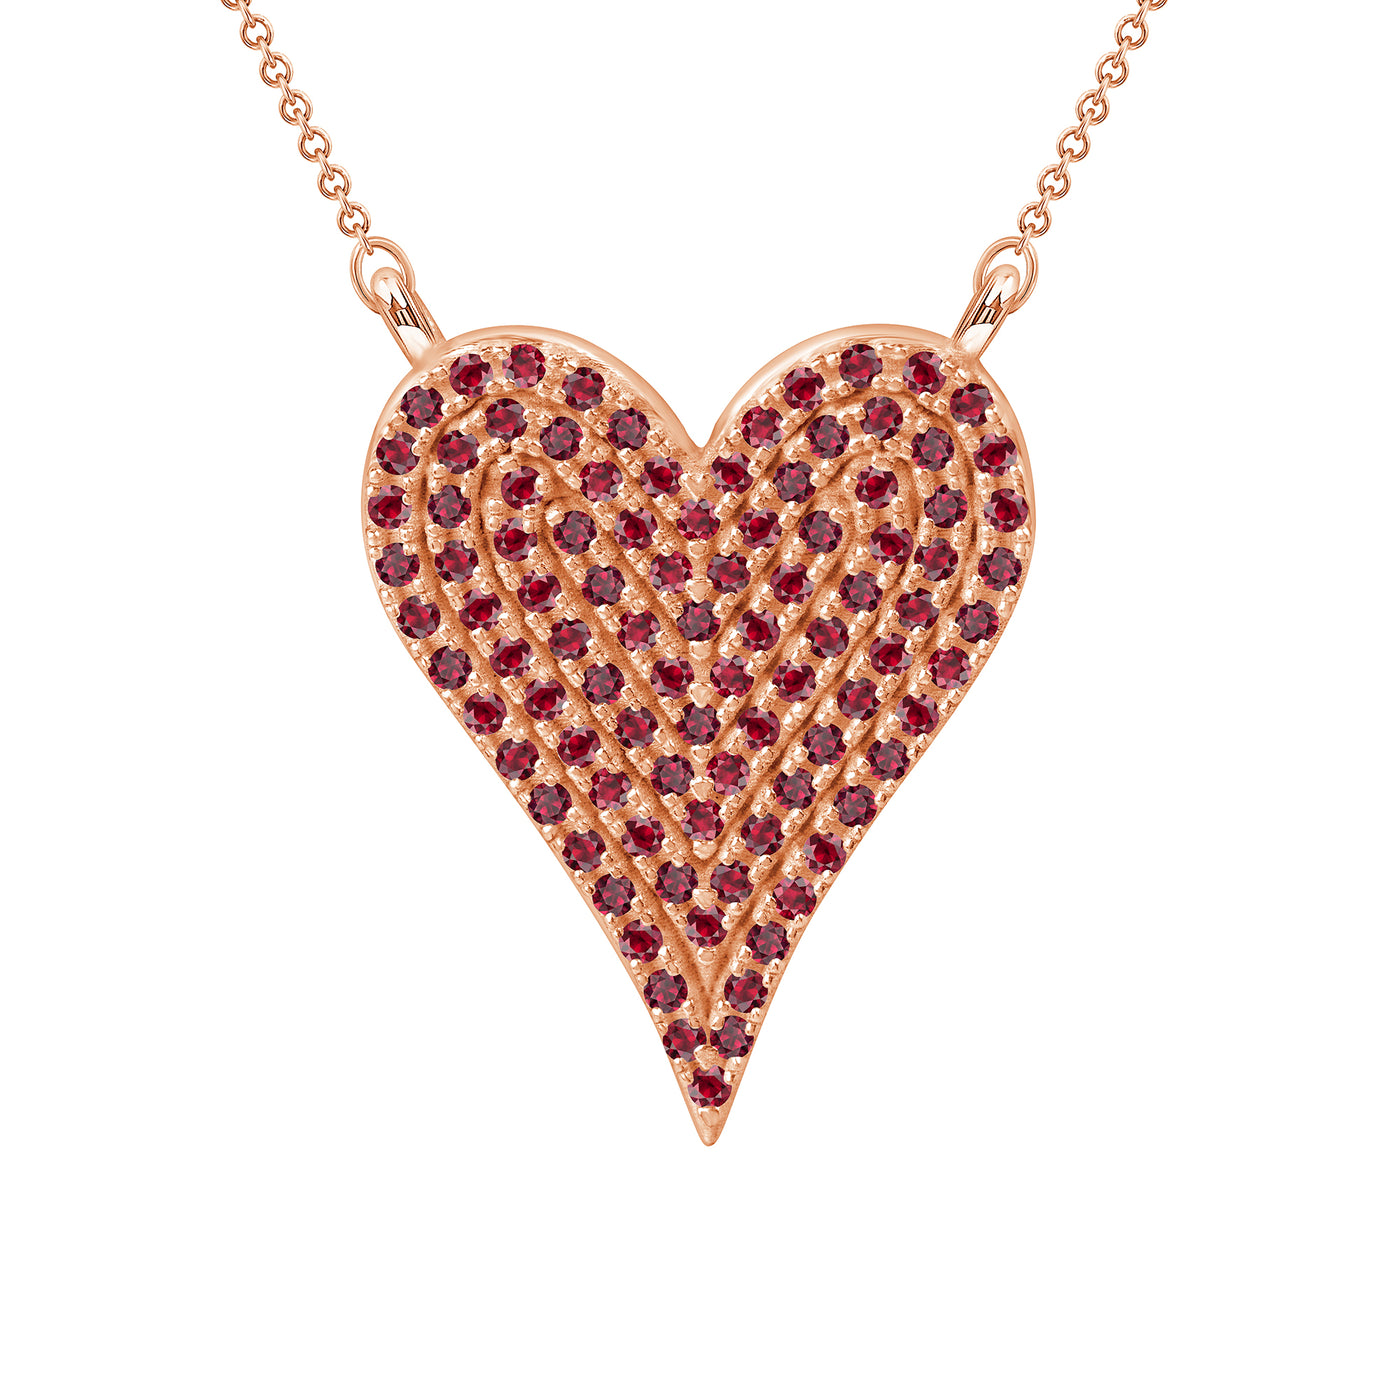 1.02 Carat Round Cut Ruby Heart Pendant In Yellow, White or Rose Gold with 16" Rolo Chain